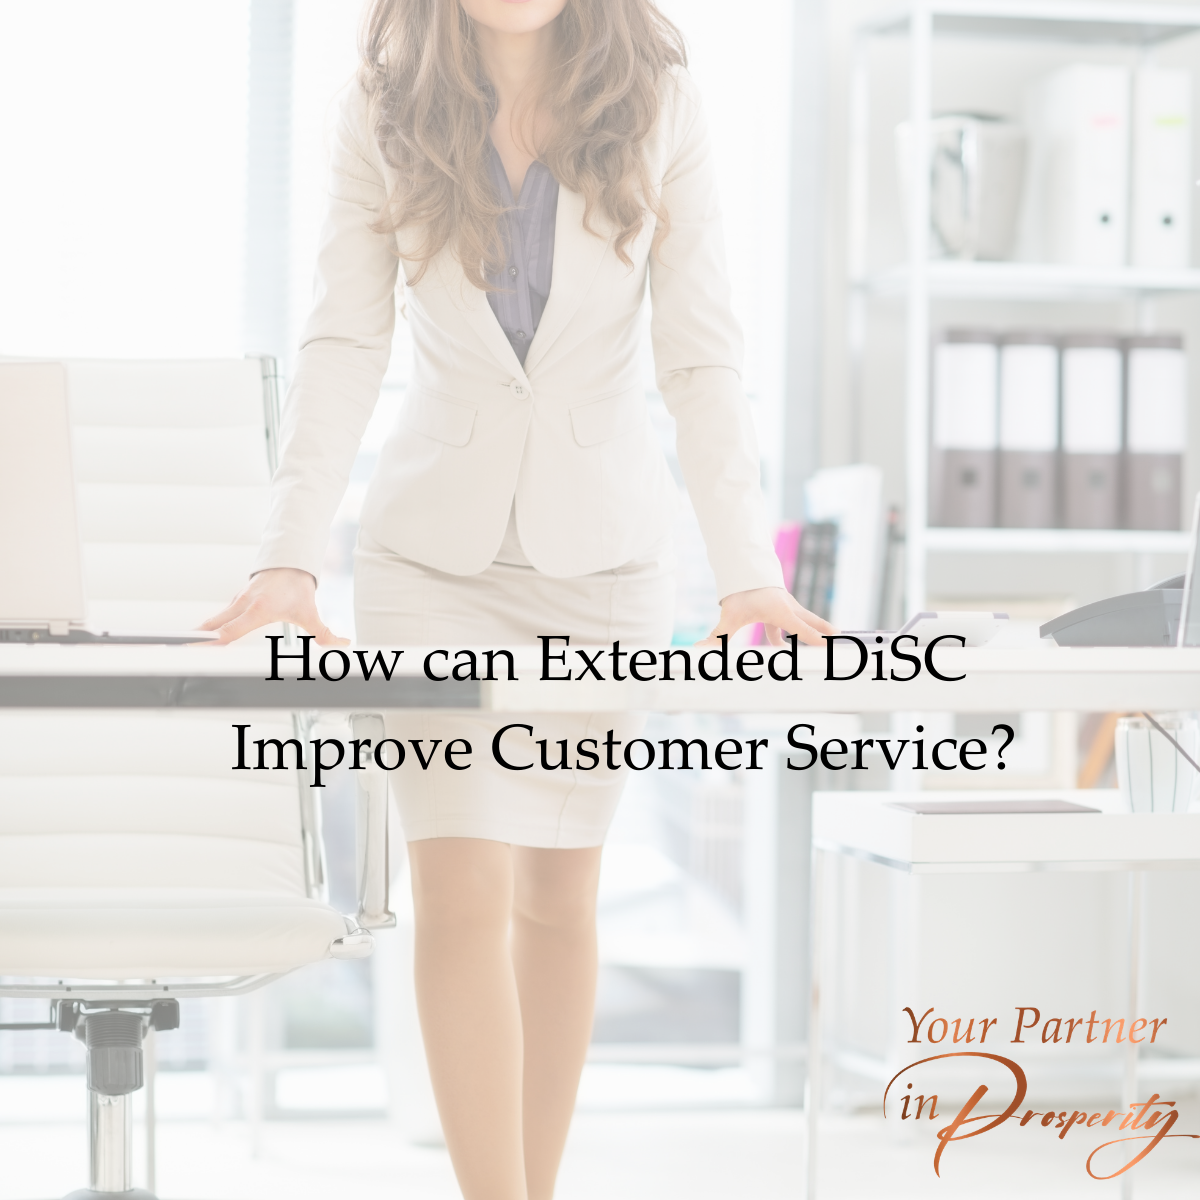 How can Extended DiSC Improve Customer Service?